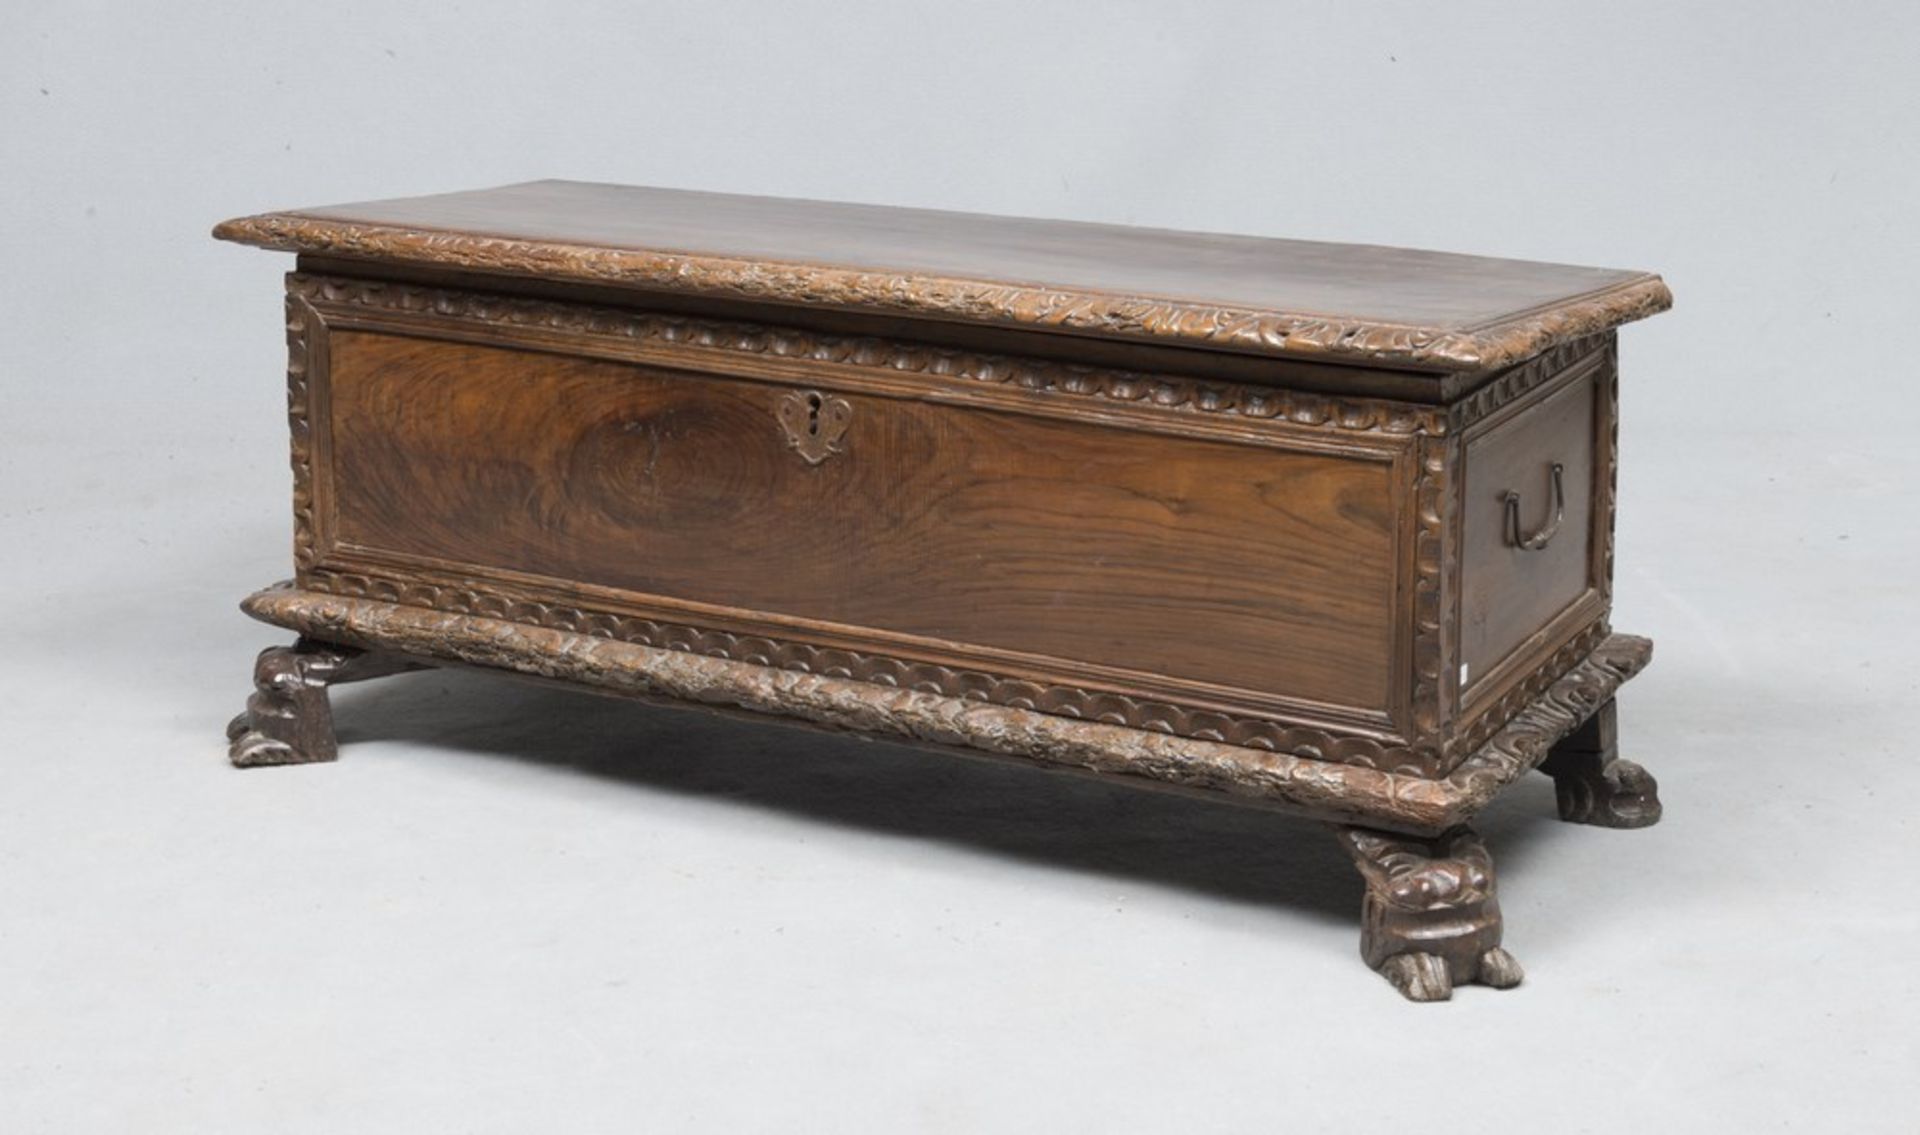 Rare walnut chest, central Italy, late 16th century